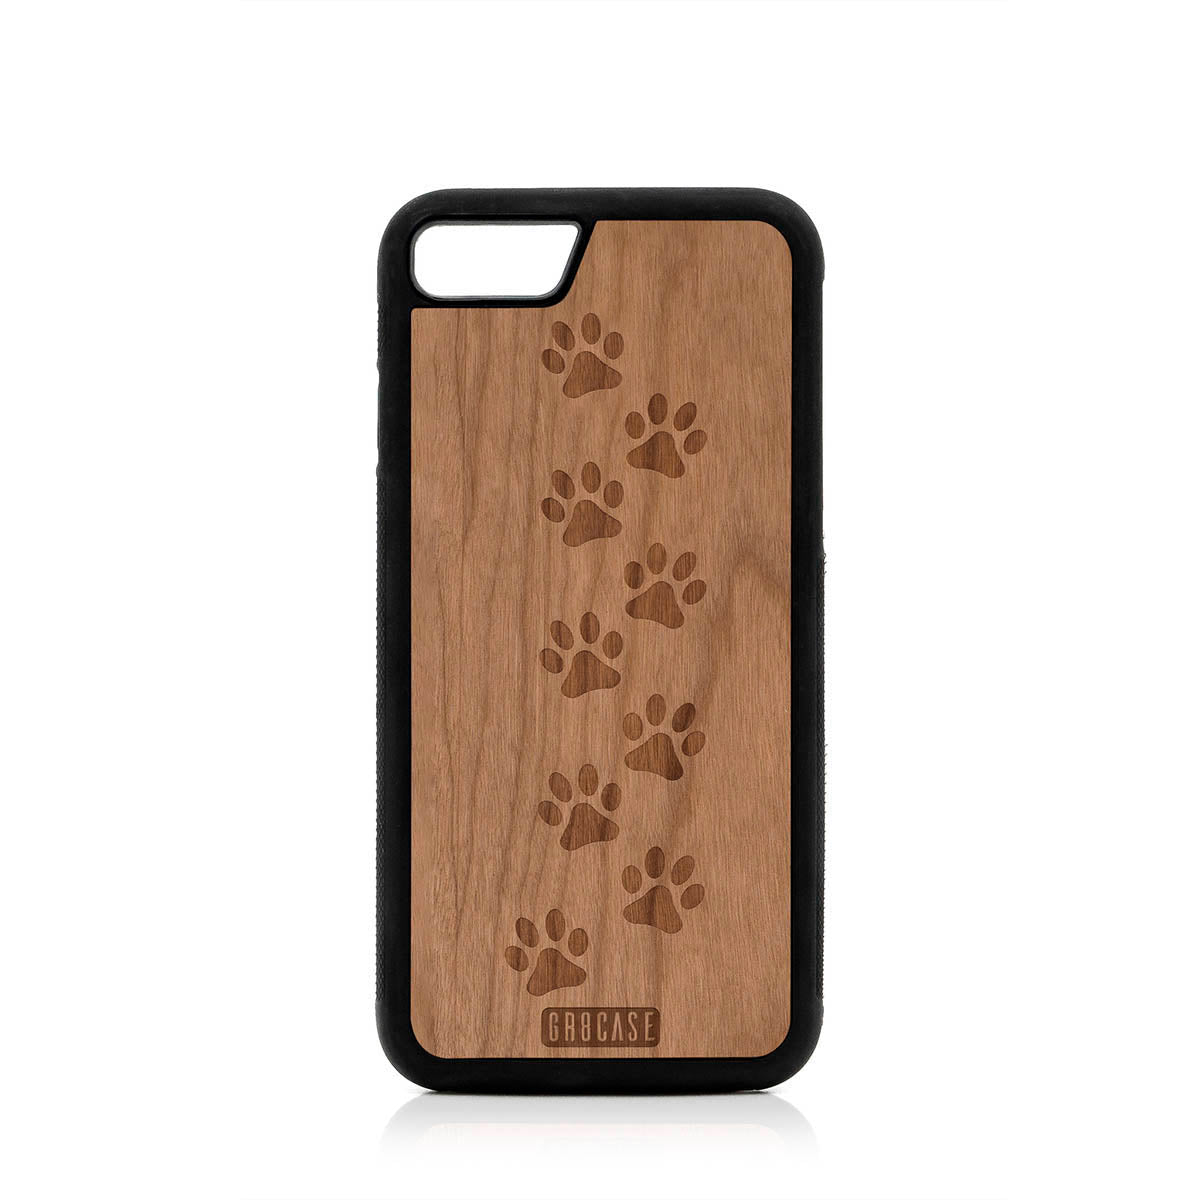 Paw Prints Design Wood Case For iPhone 7/8 by GR8CASE